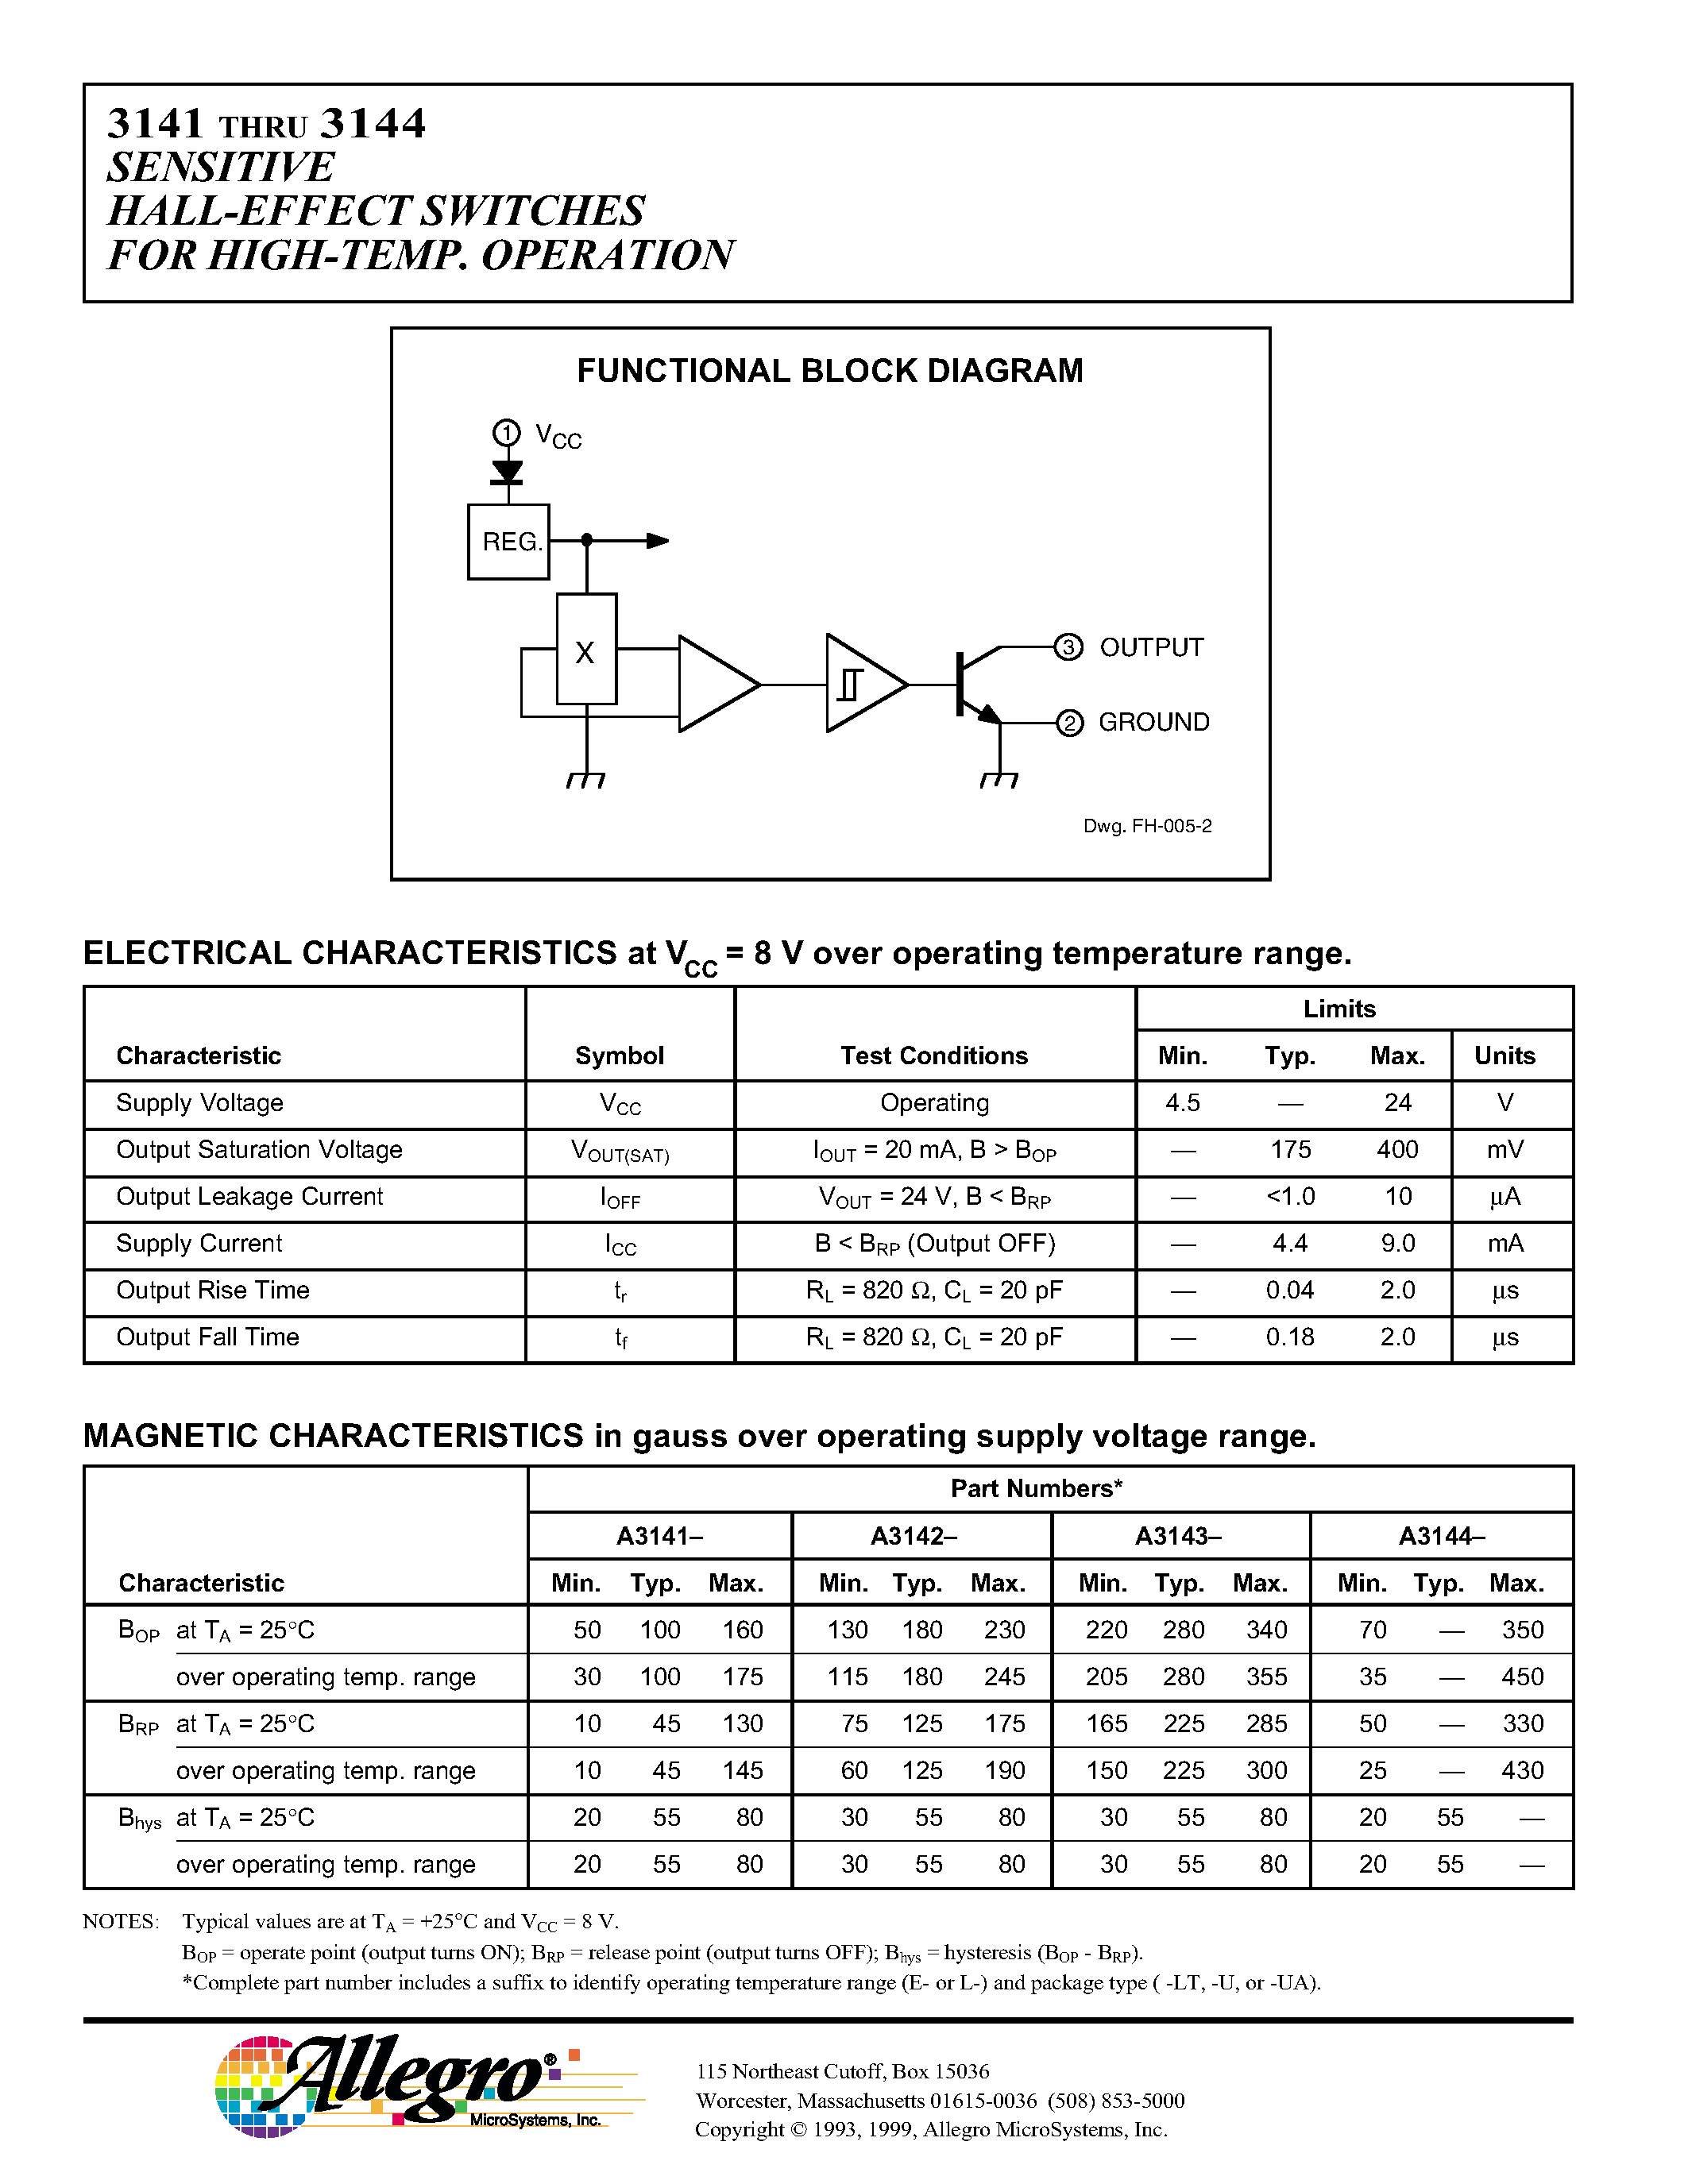 Даташит A3144-U-SENSITIVE HALL-EFFECT SWITCHES FOR HIGH-TEMPERATURE OPERATION страница 2